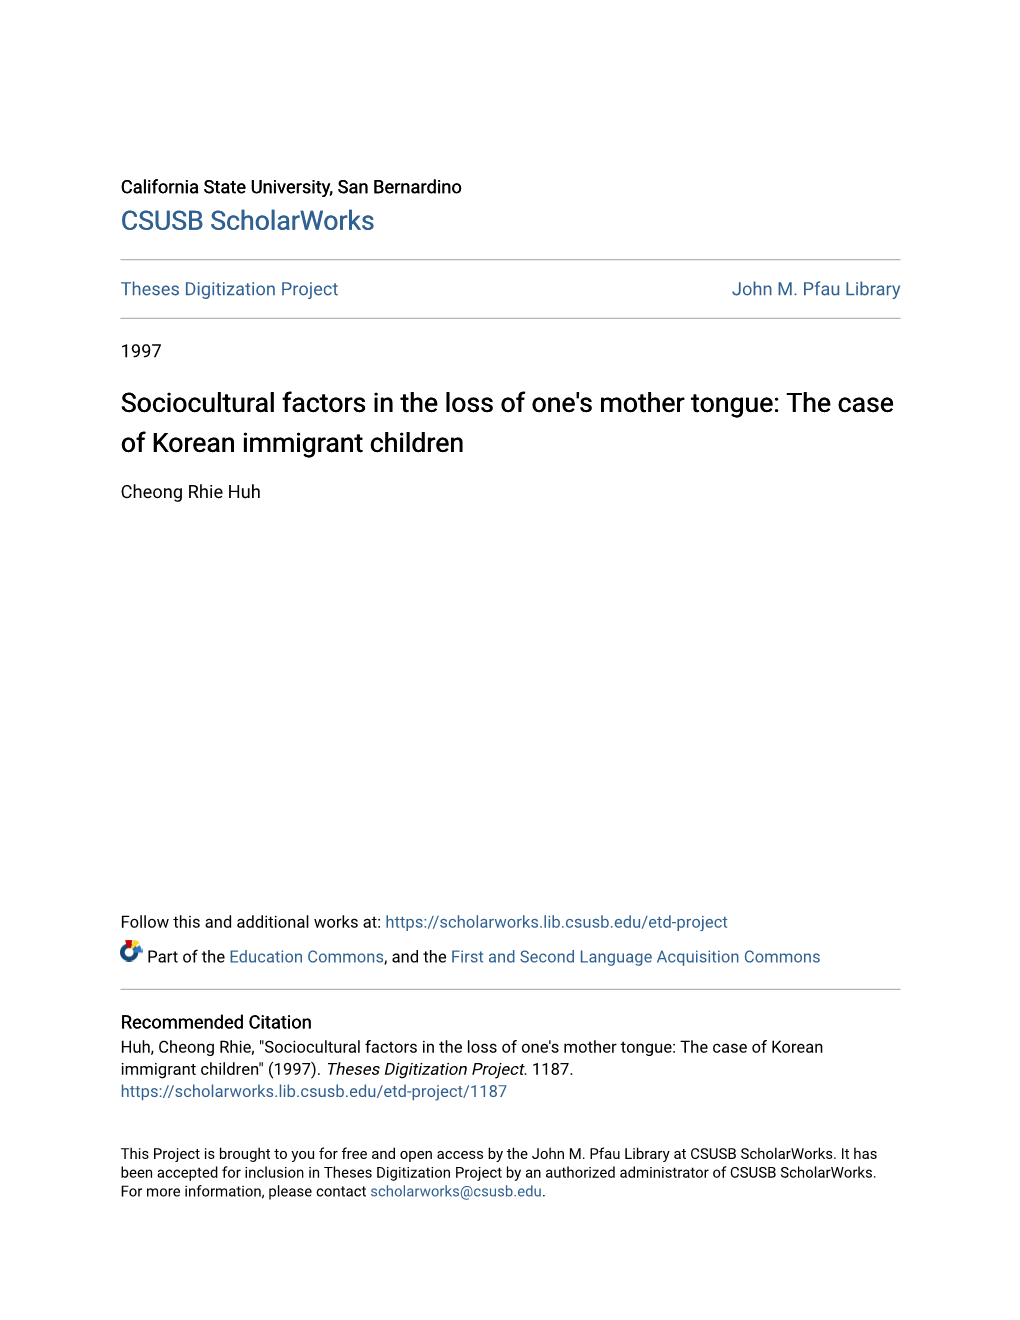 Sociocultural Factors in the Loss of One's Mother Tongue: the Case of Korean Immigrant Children